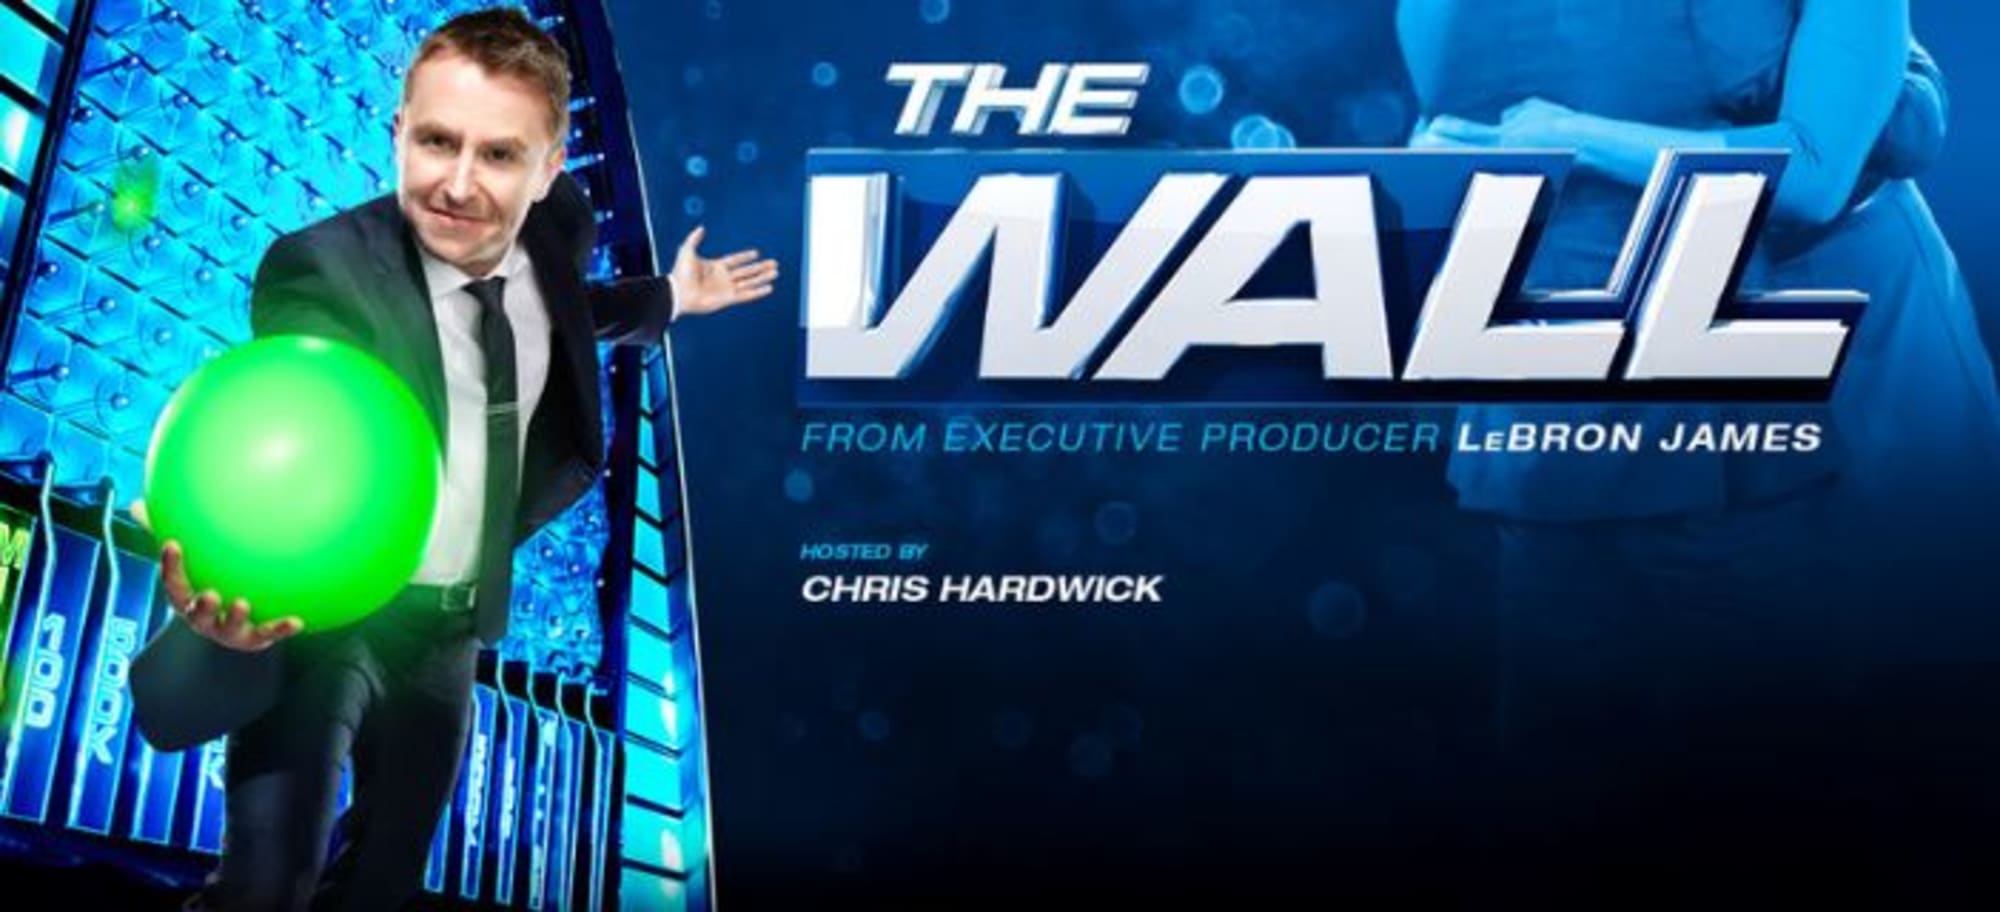 Chris Hardwick to host NBC game show The Wall